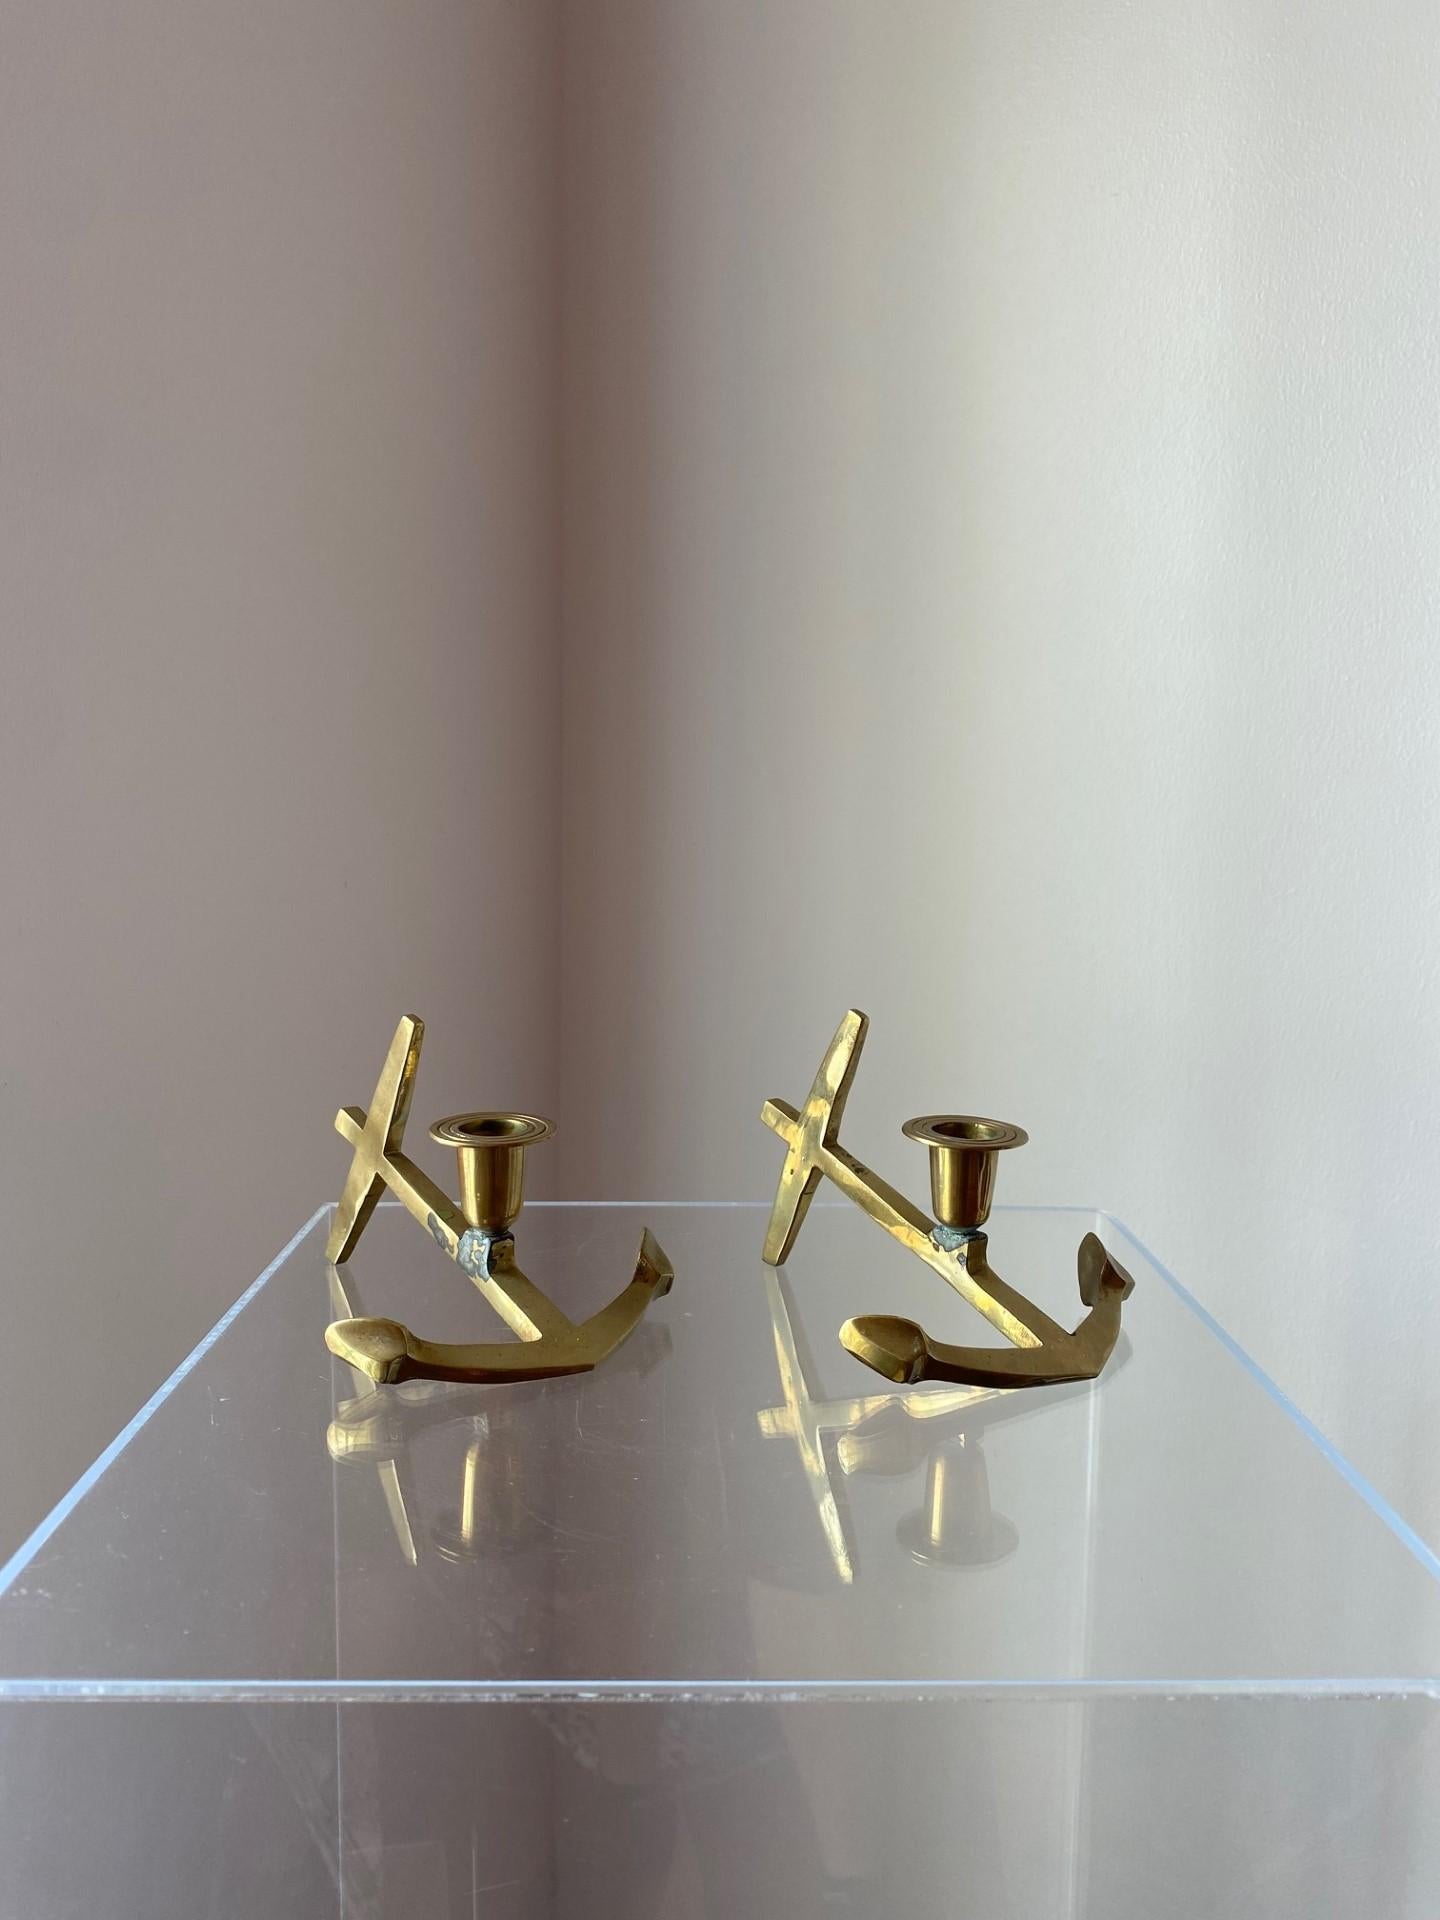 Beautifully forged in solid brass, these nautical anchors have a classic aesthetic that is ideal for coastal and nautical décor but can easily translate to industrial and eclectic styles. Stylish and with beautiful patina. An incredible addition to